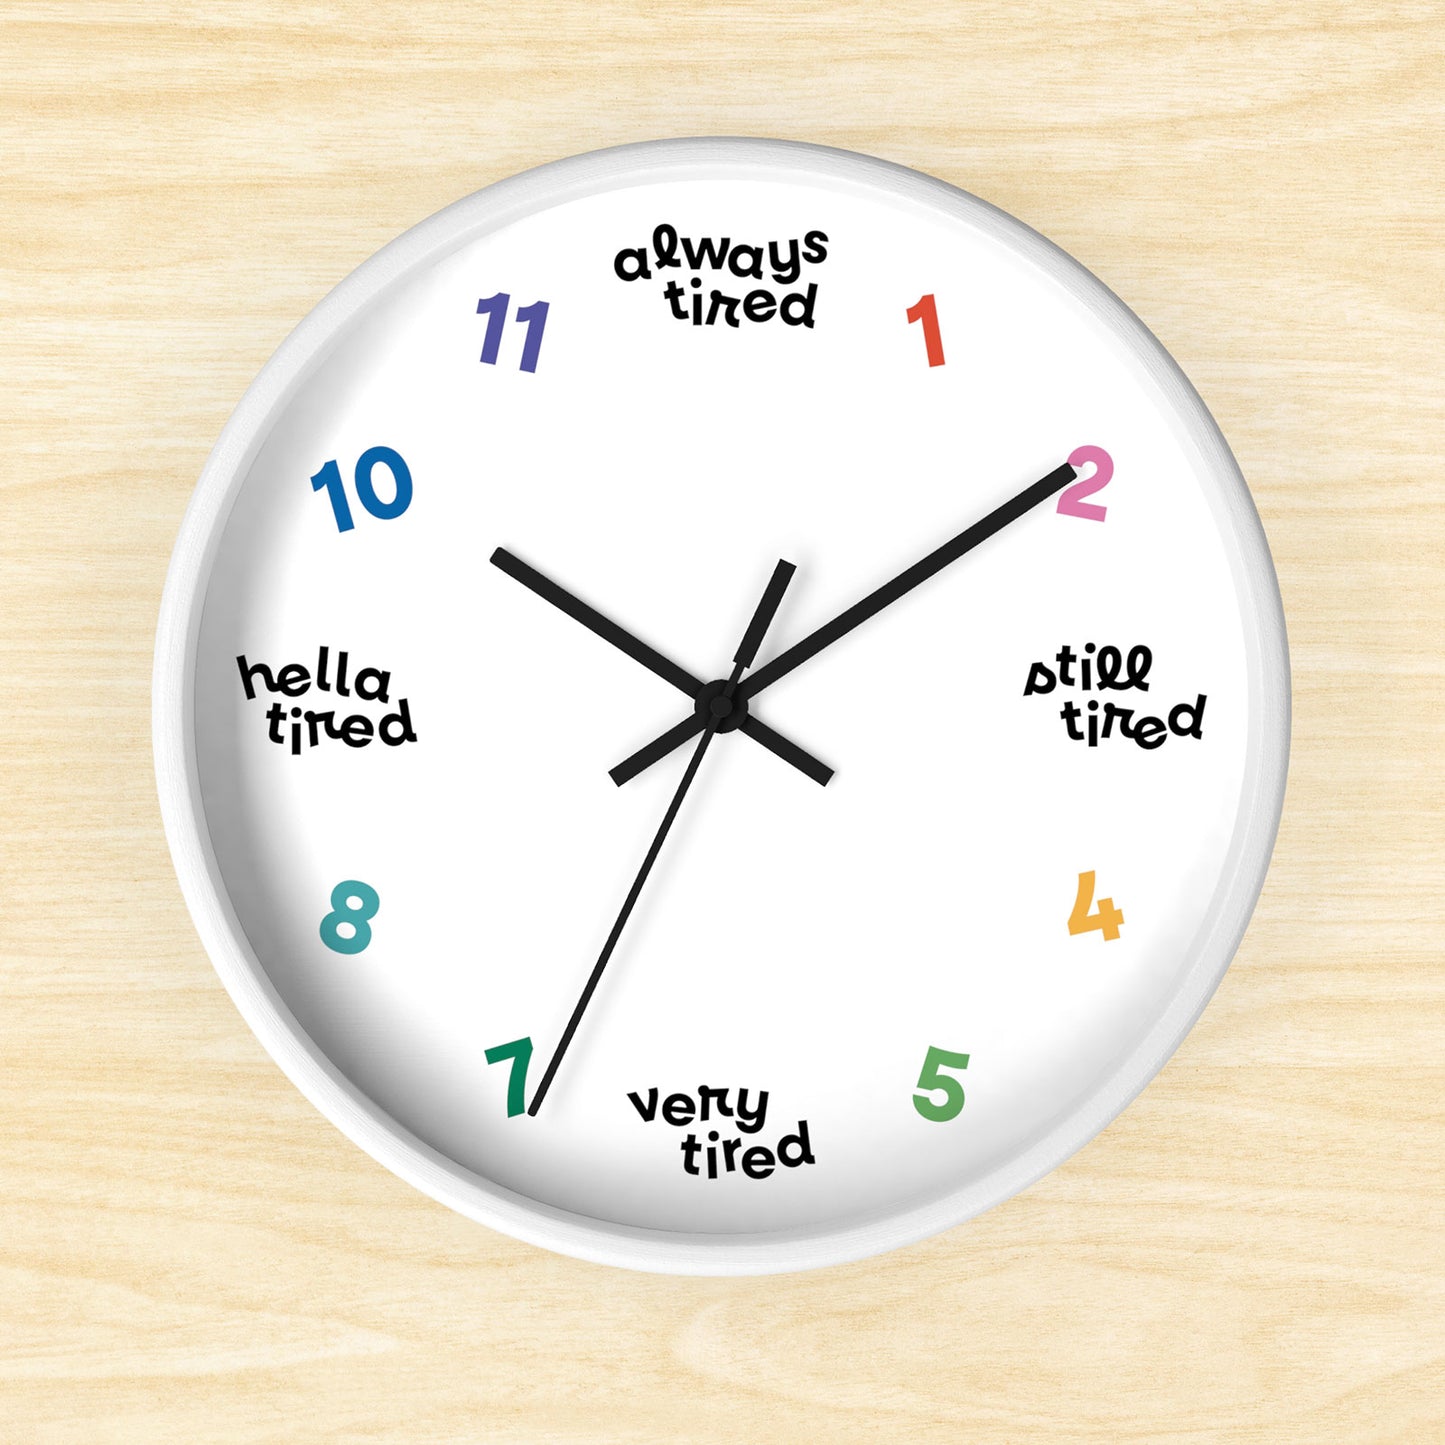 Hanging wall clock with a swedish minimal design. On 4 quadrants, there are variations of "tired" instead of the hour markers. The remaining numbers are cheerful bright colors. This clock has a white frame.